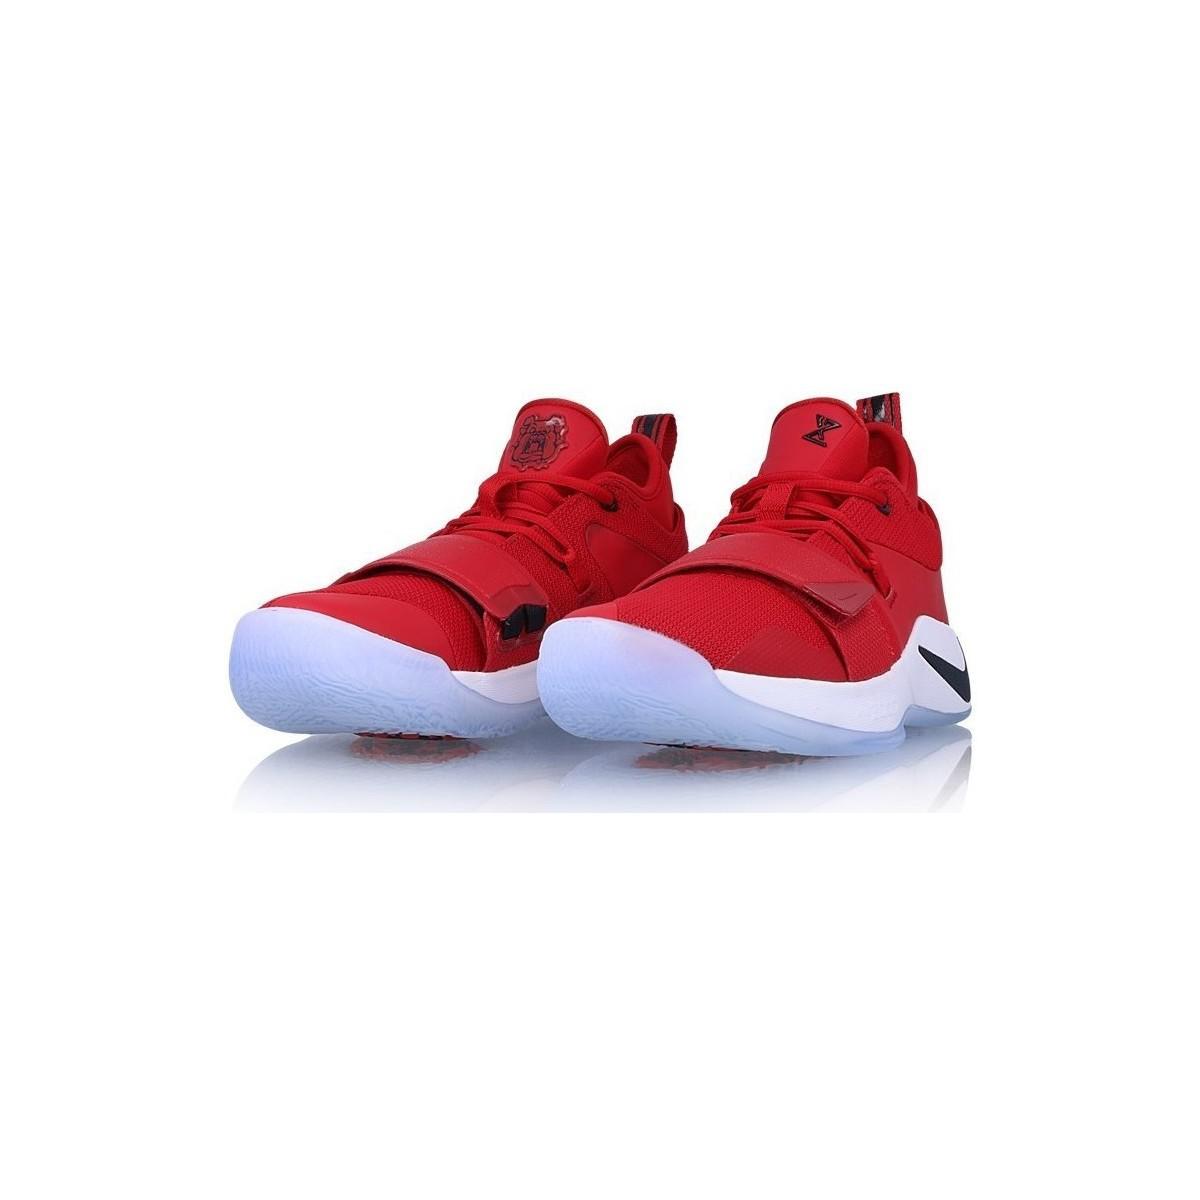 pg2 5 red